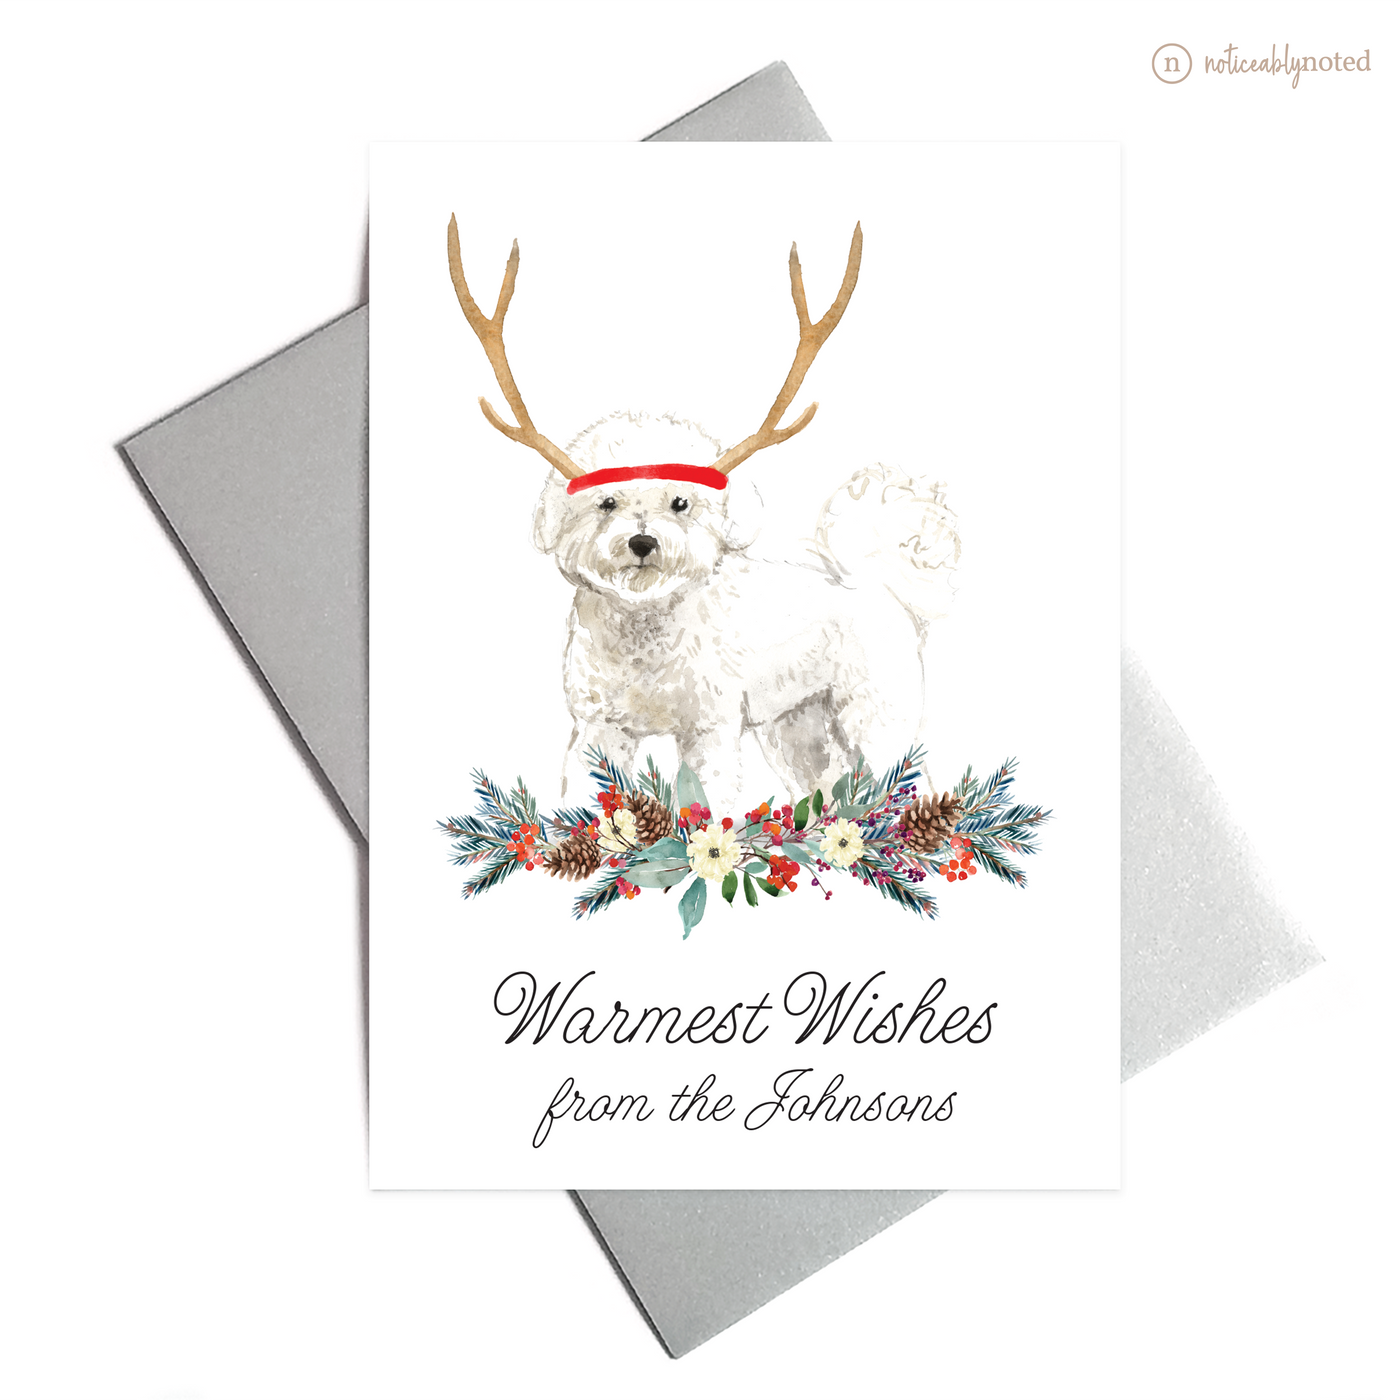 Bichon Frise Dog Holiday Greeting Cards | Noticeably Noted